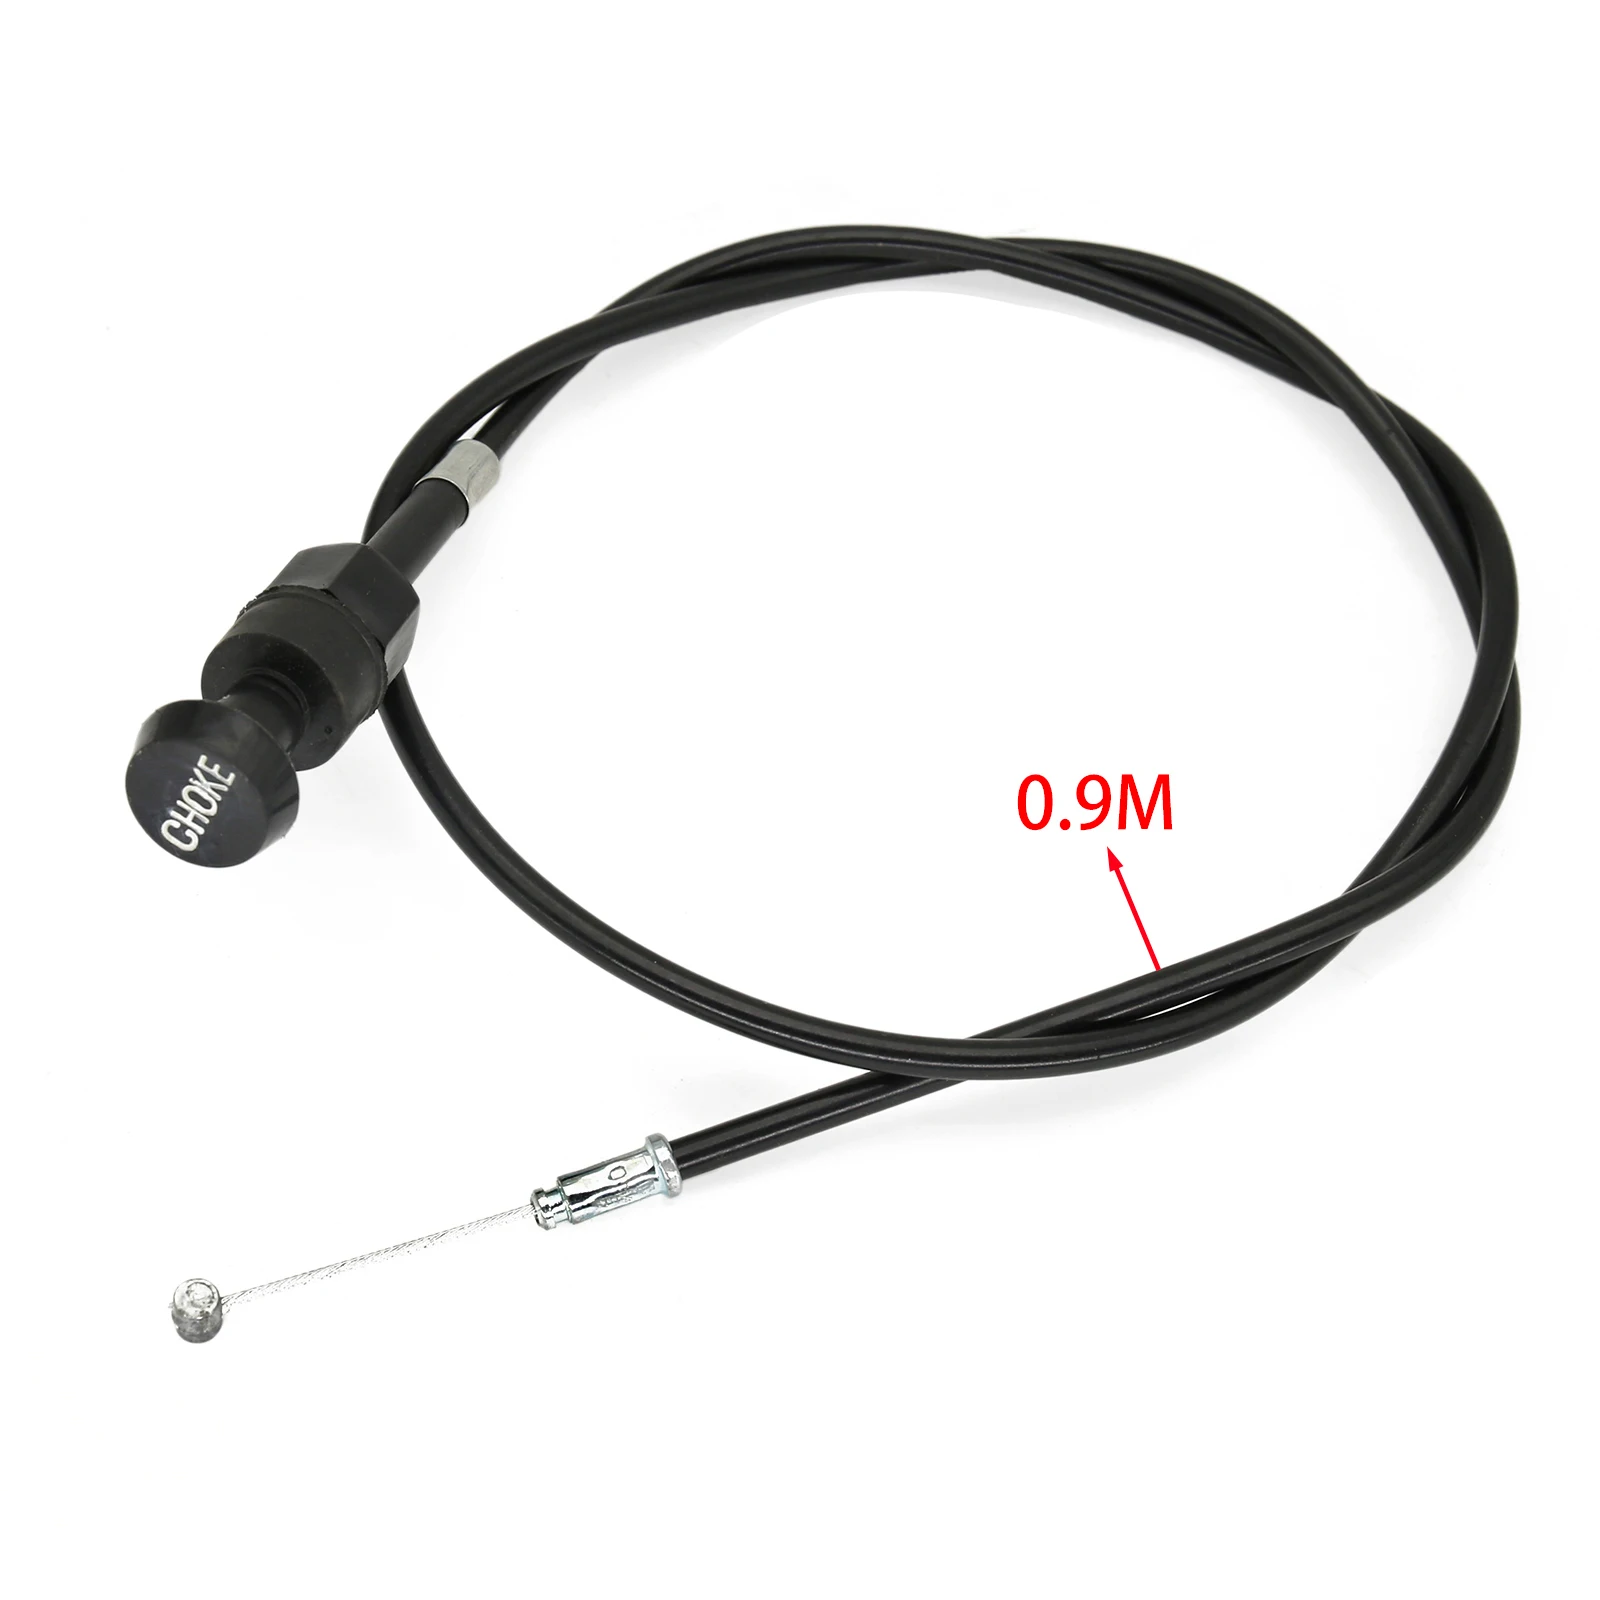 90cm Choke Cable Wire For Honda CBR XL185S XL250 XL250R XR250 XR250L Yamaha PW50 High Quality Motorcycle Accessories